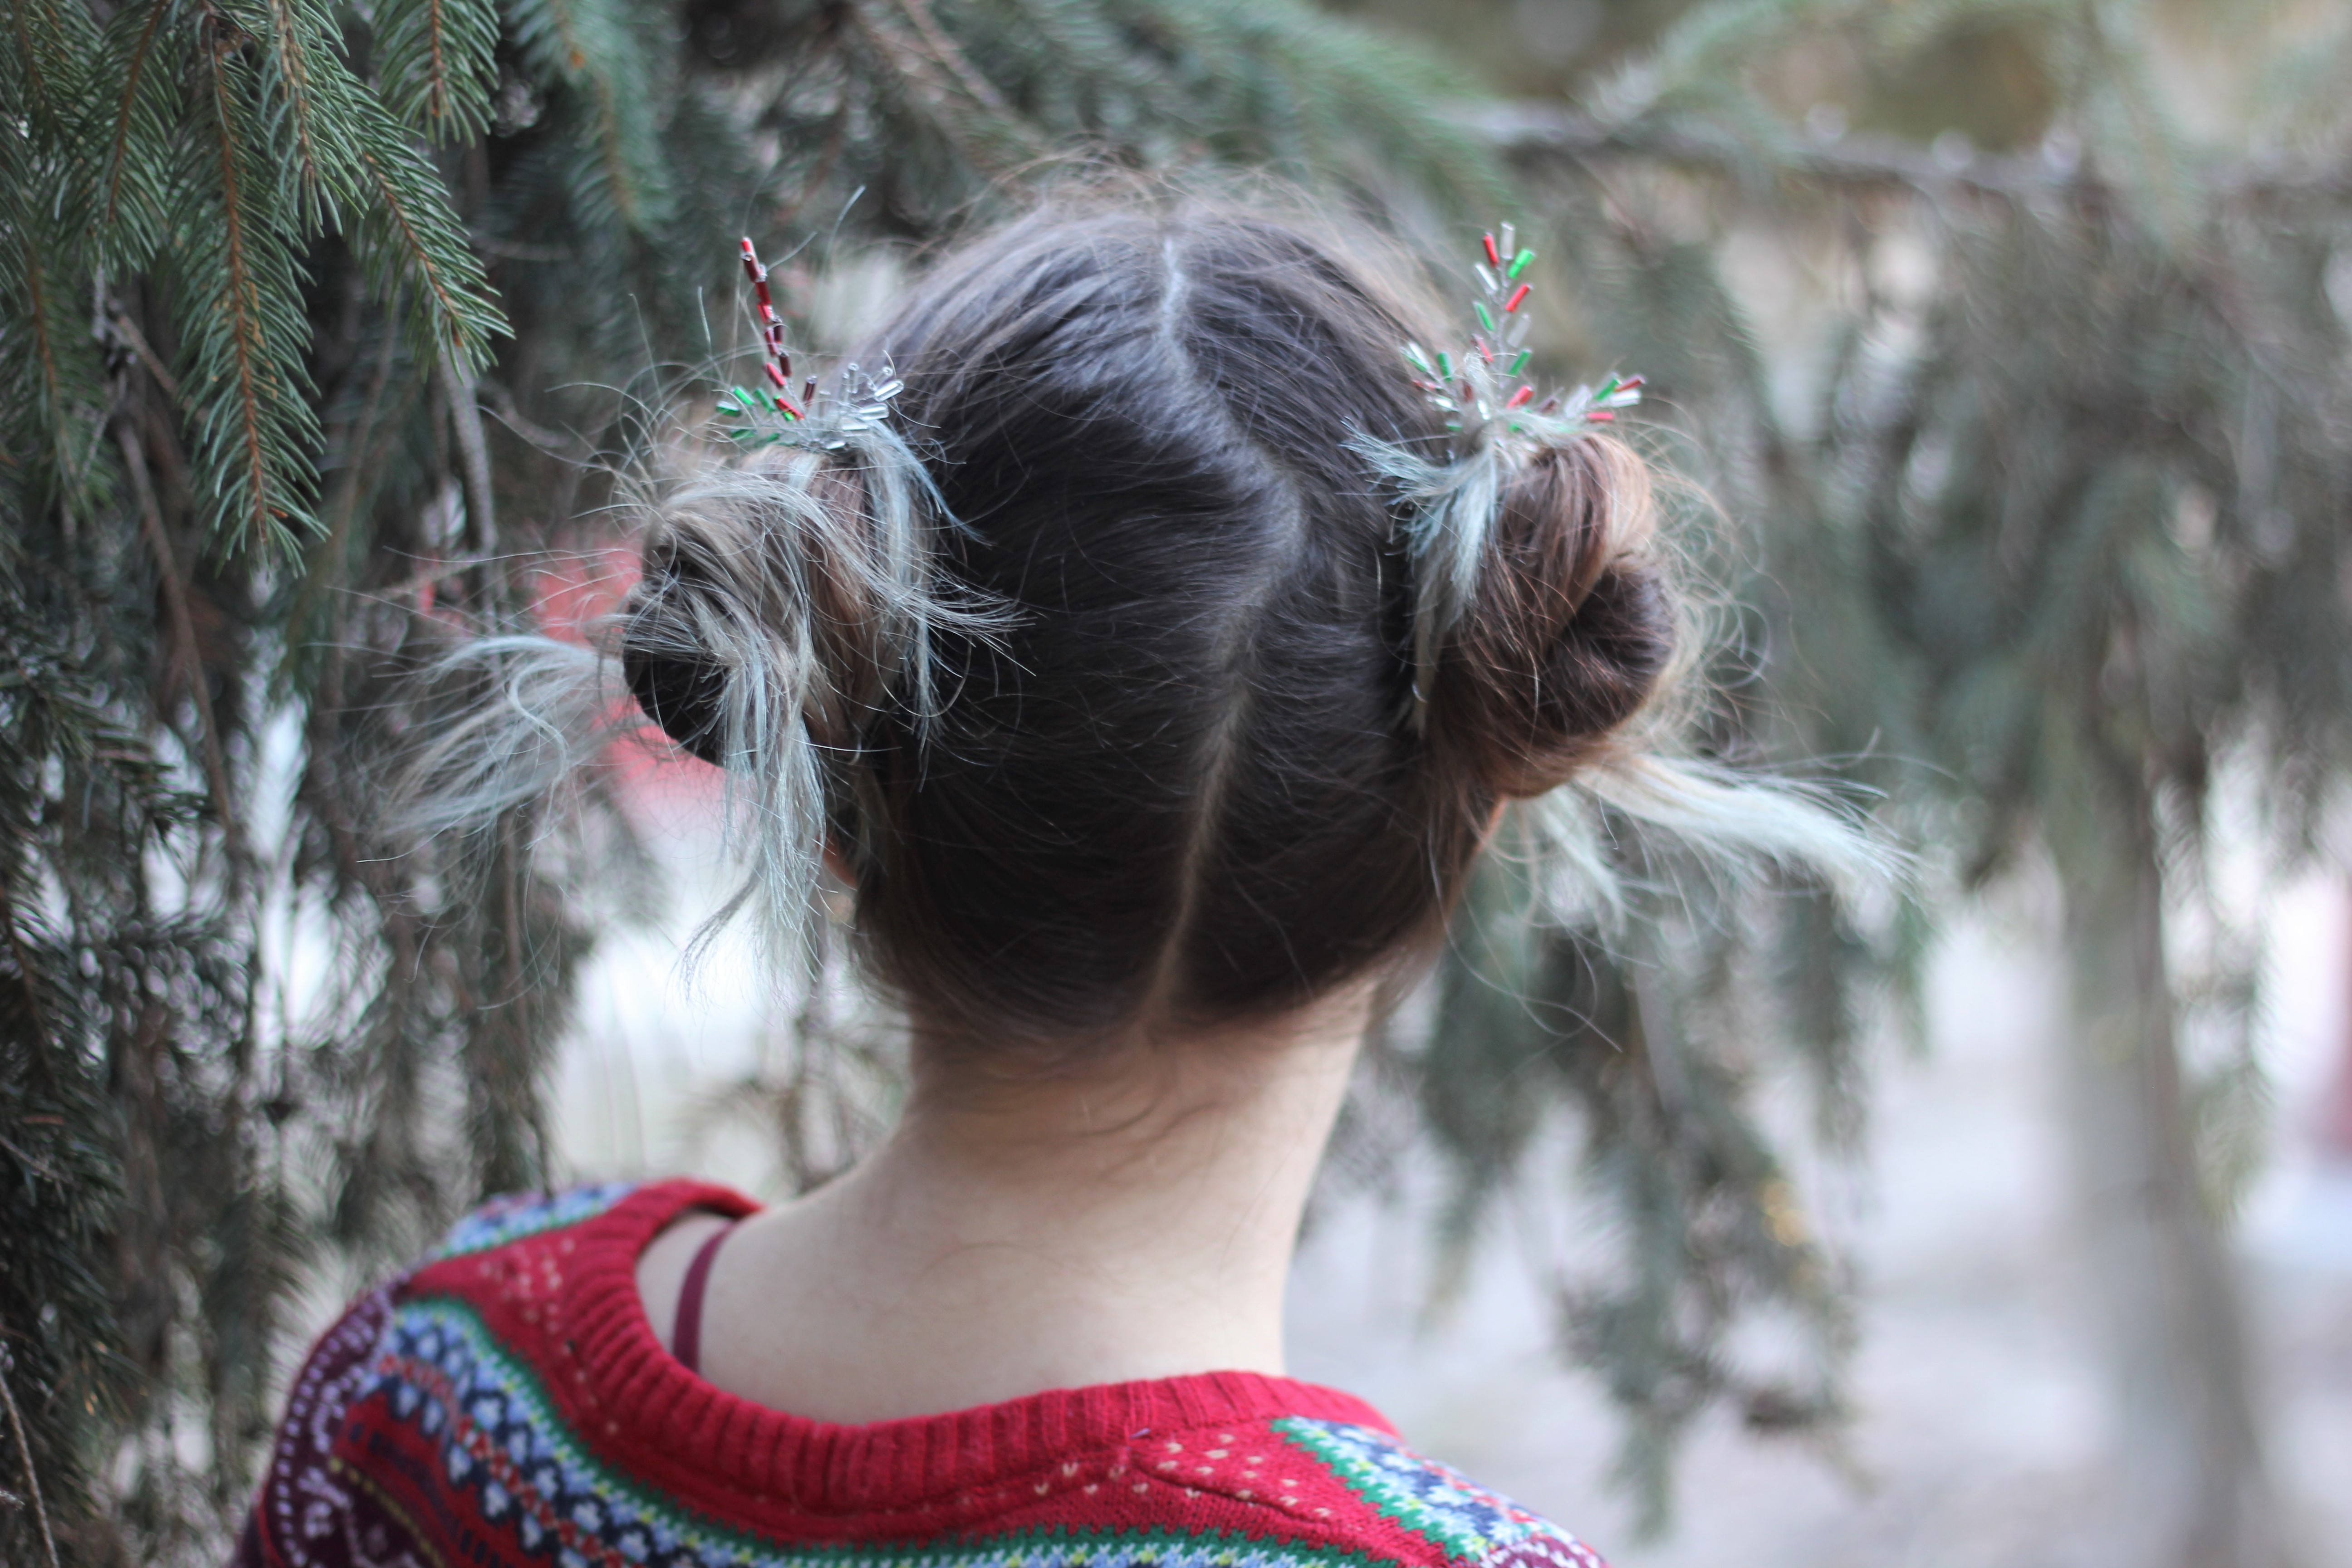 Two messy hair buns with cute Christmas inspired hair pins